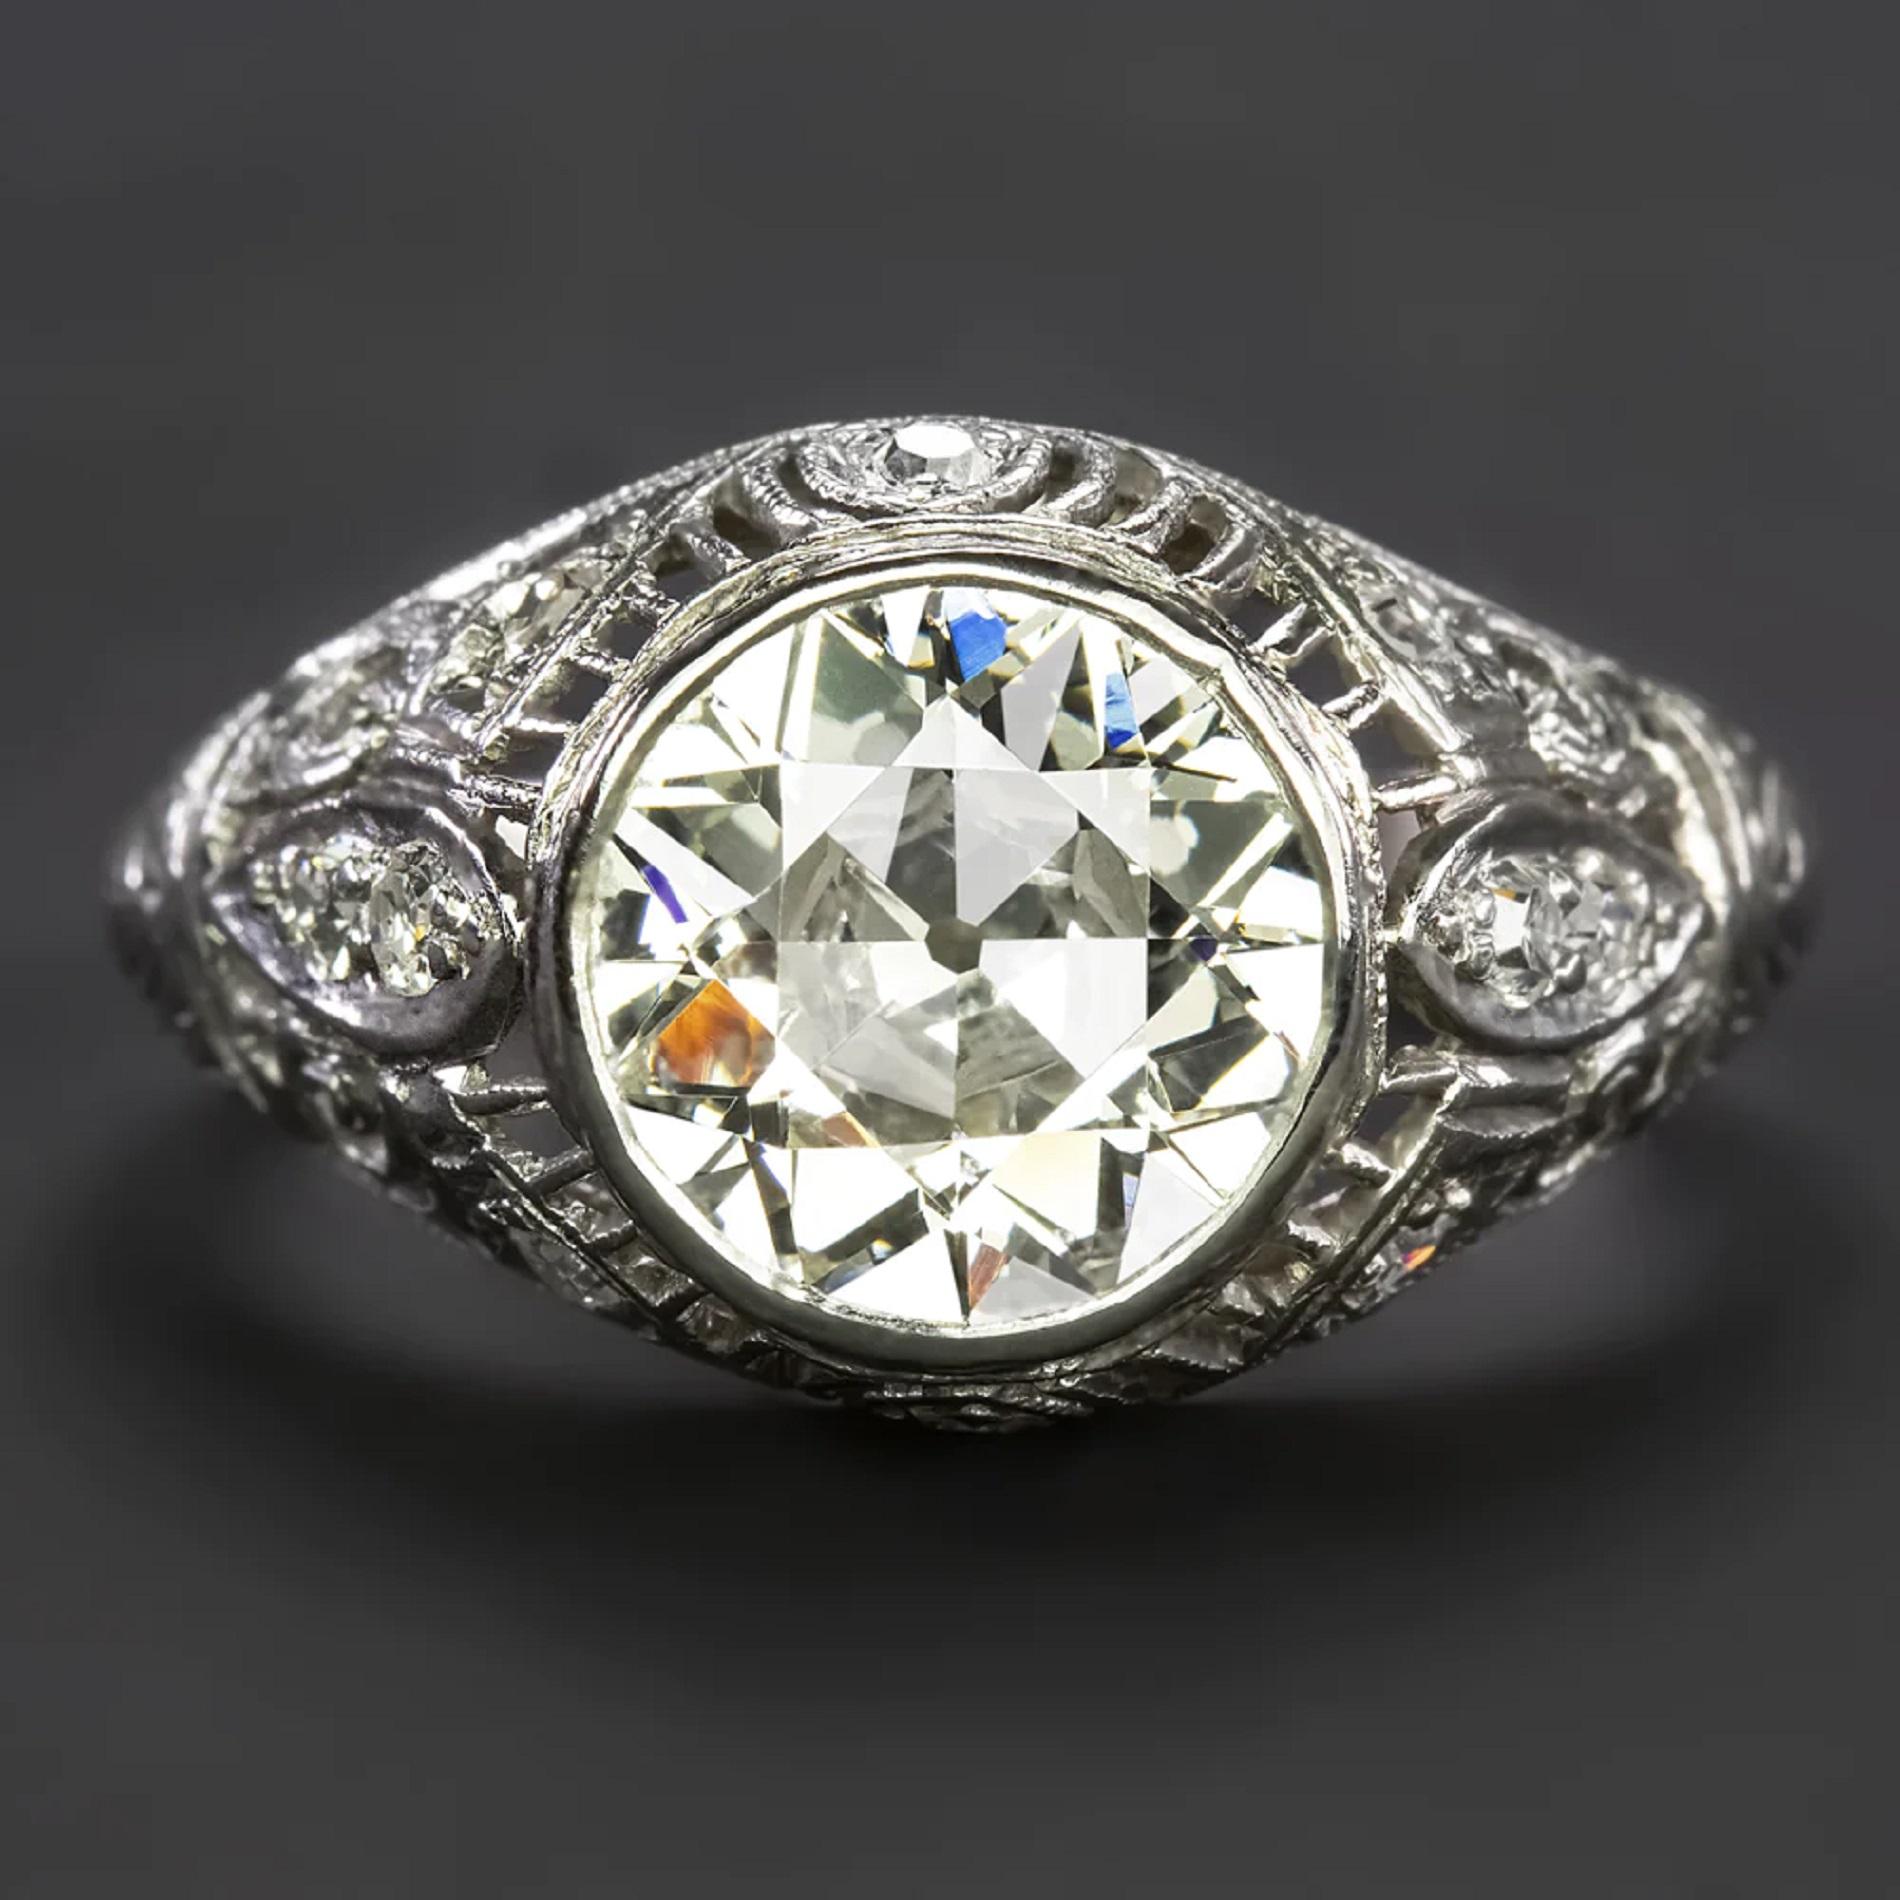 Authentic Vintage 2.27 Carat Old European Cut Diamond Ring In Excellent Condition For Sale In Rome, IT